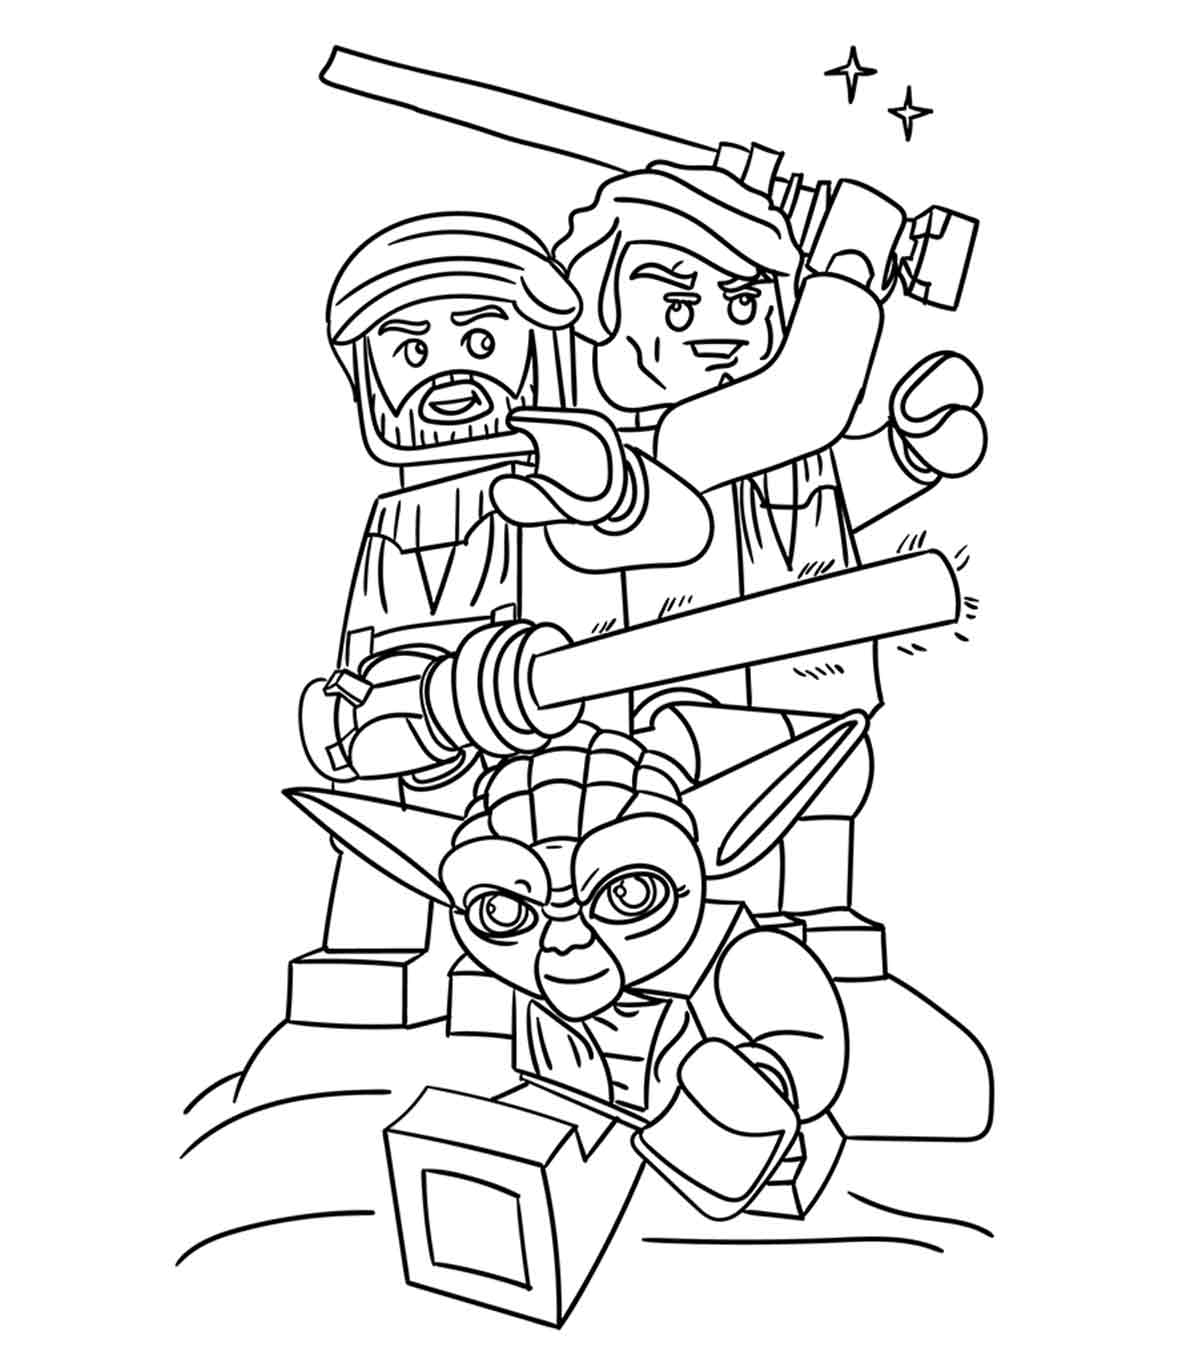 25 Wonderful Lego Movie Coloring Pages For Toddlers _image